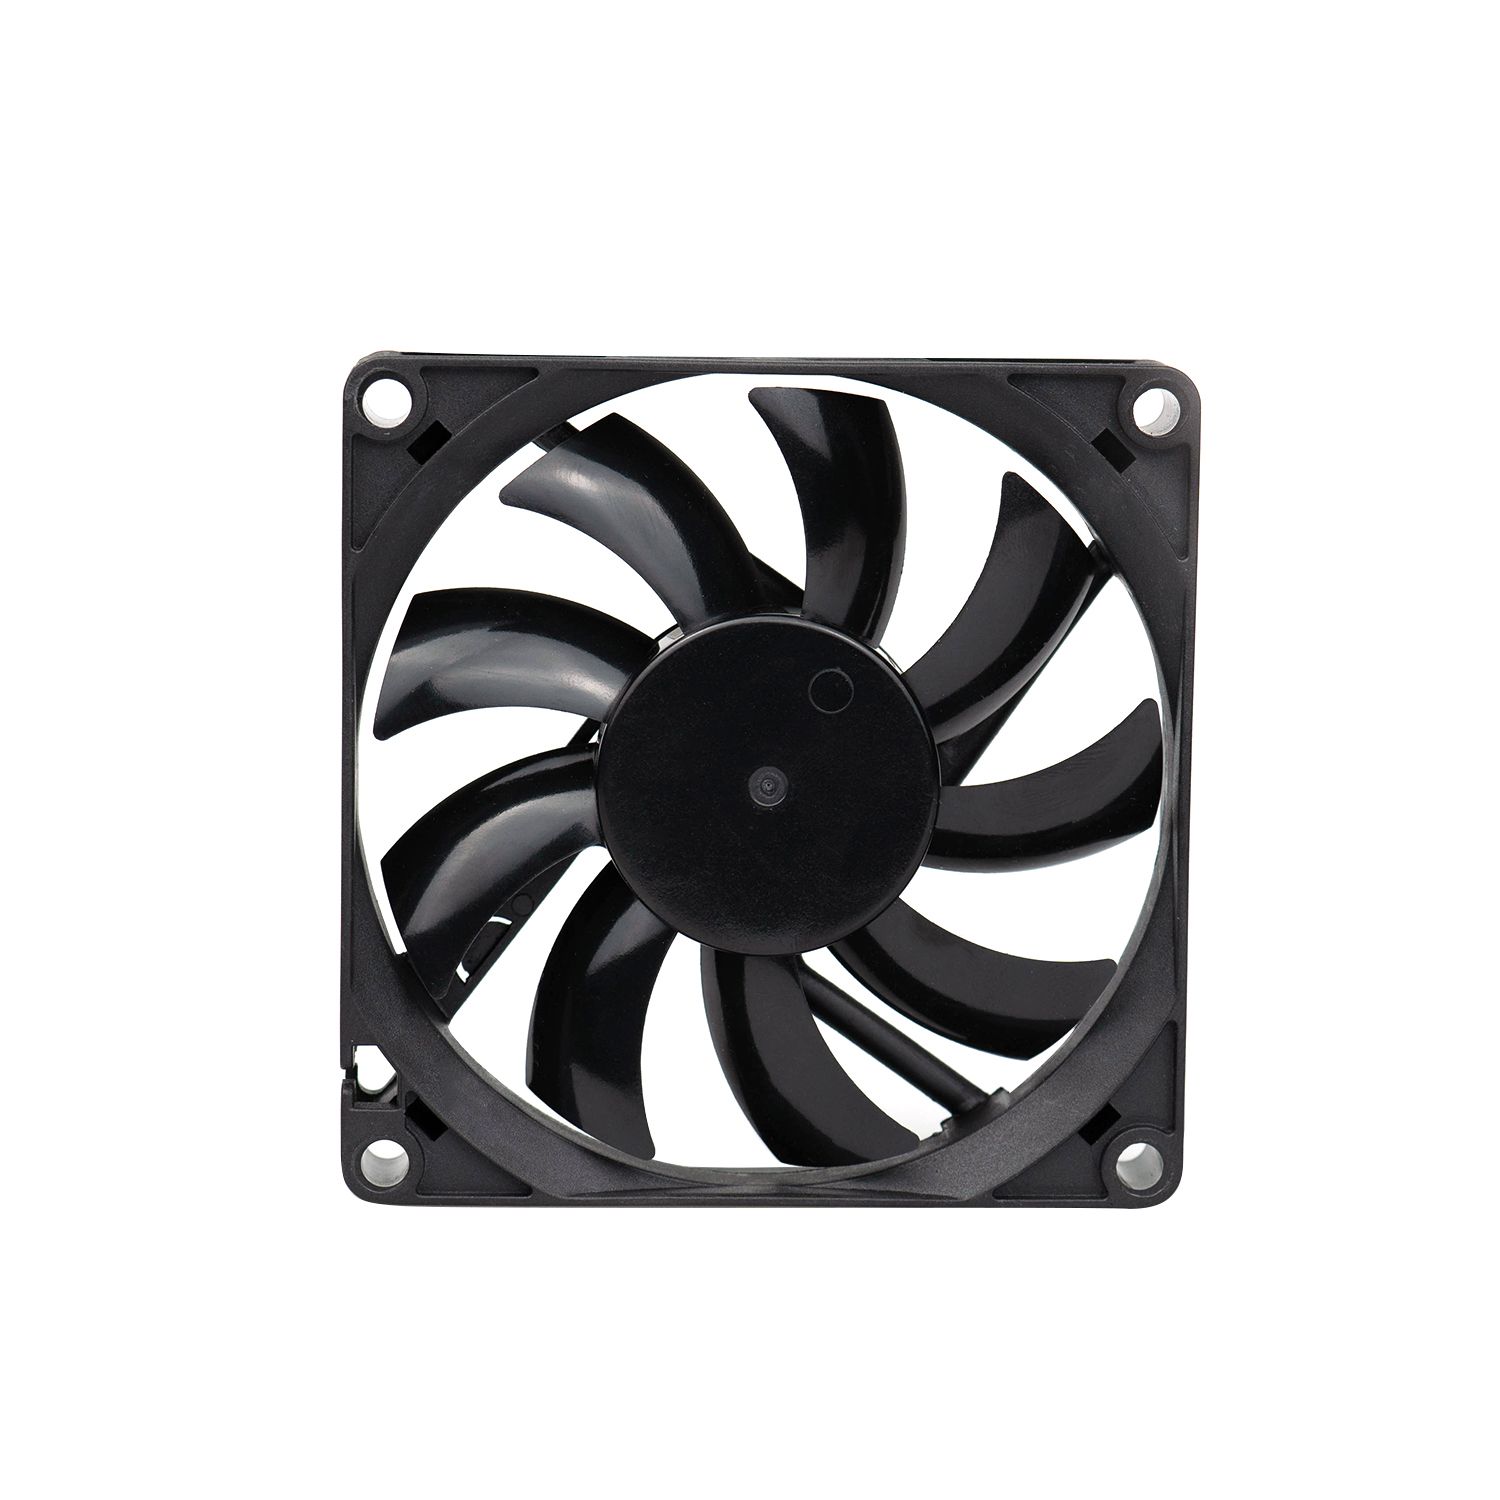 China manufacture 80mm 8015 12v 24v dc axial fan